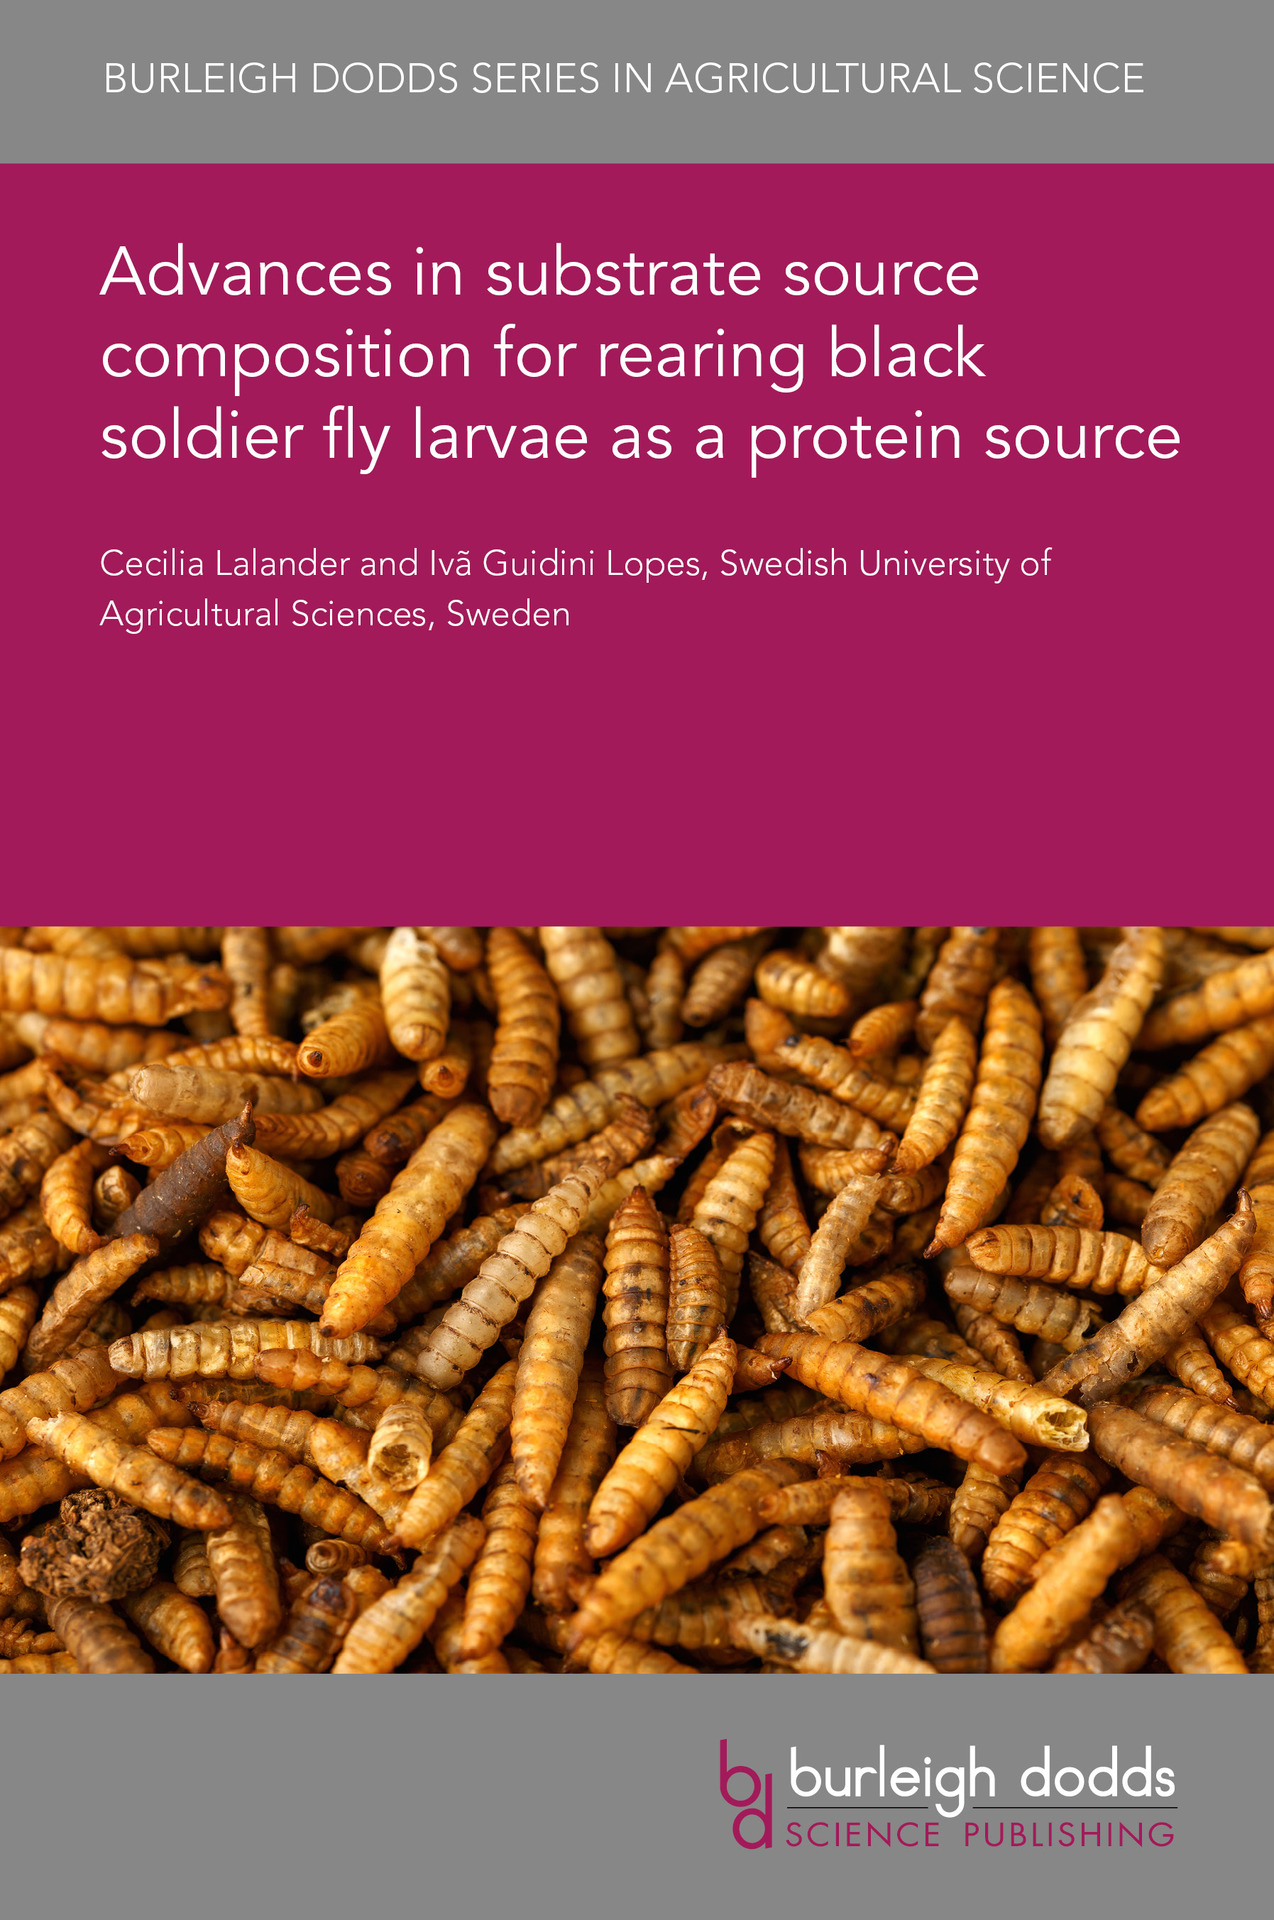 Advances in substrate source composition for rearing black soldier fly larvae as a protein source